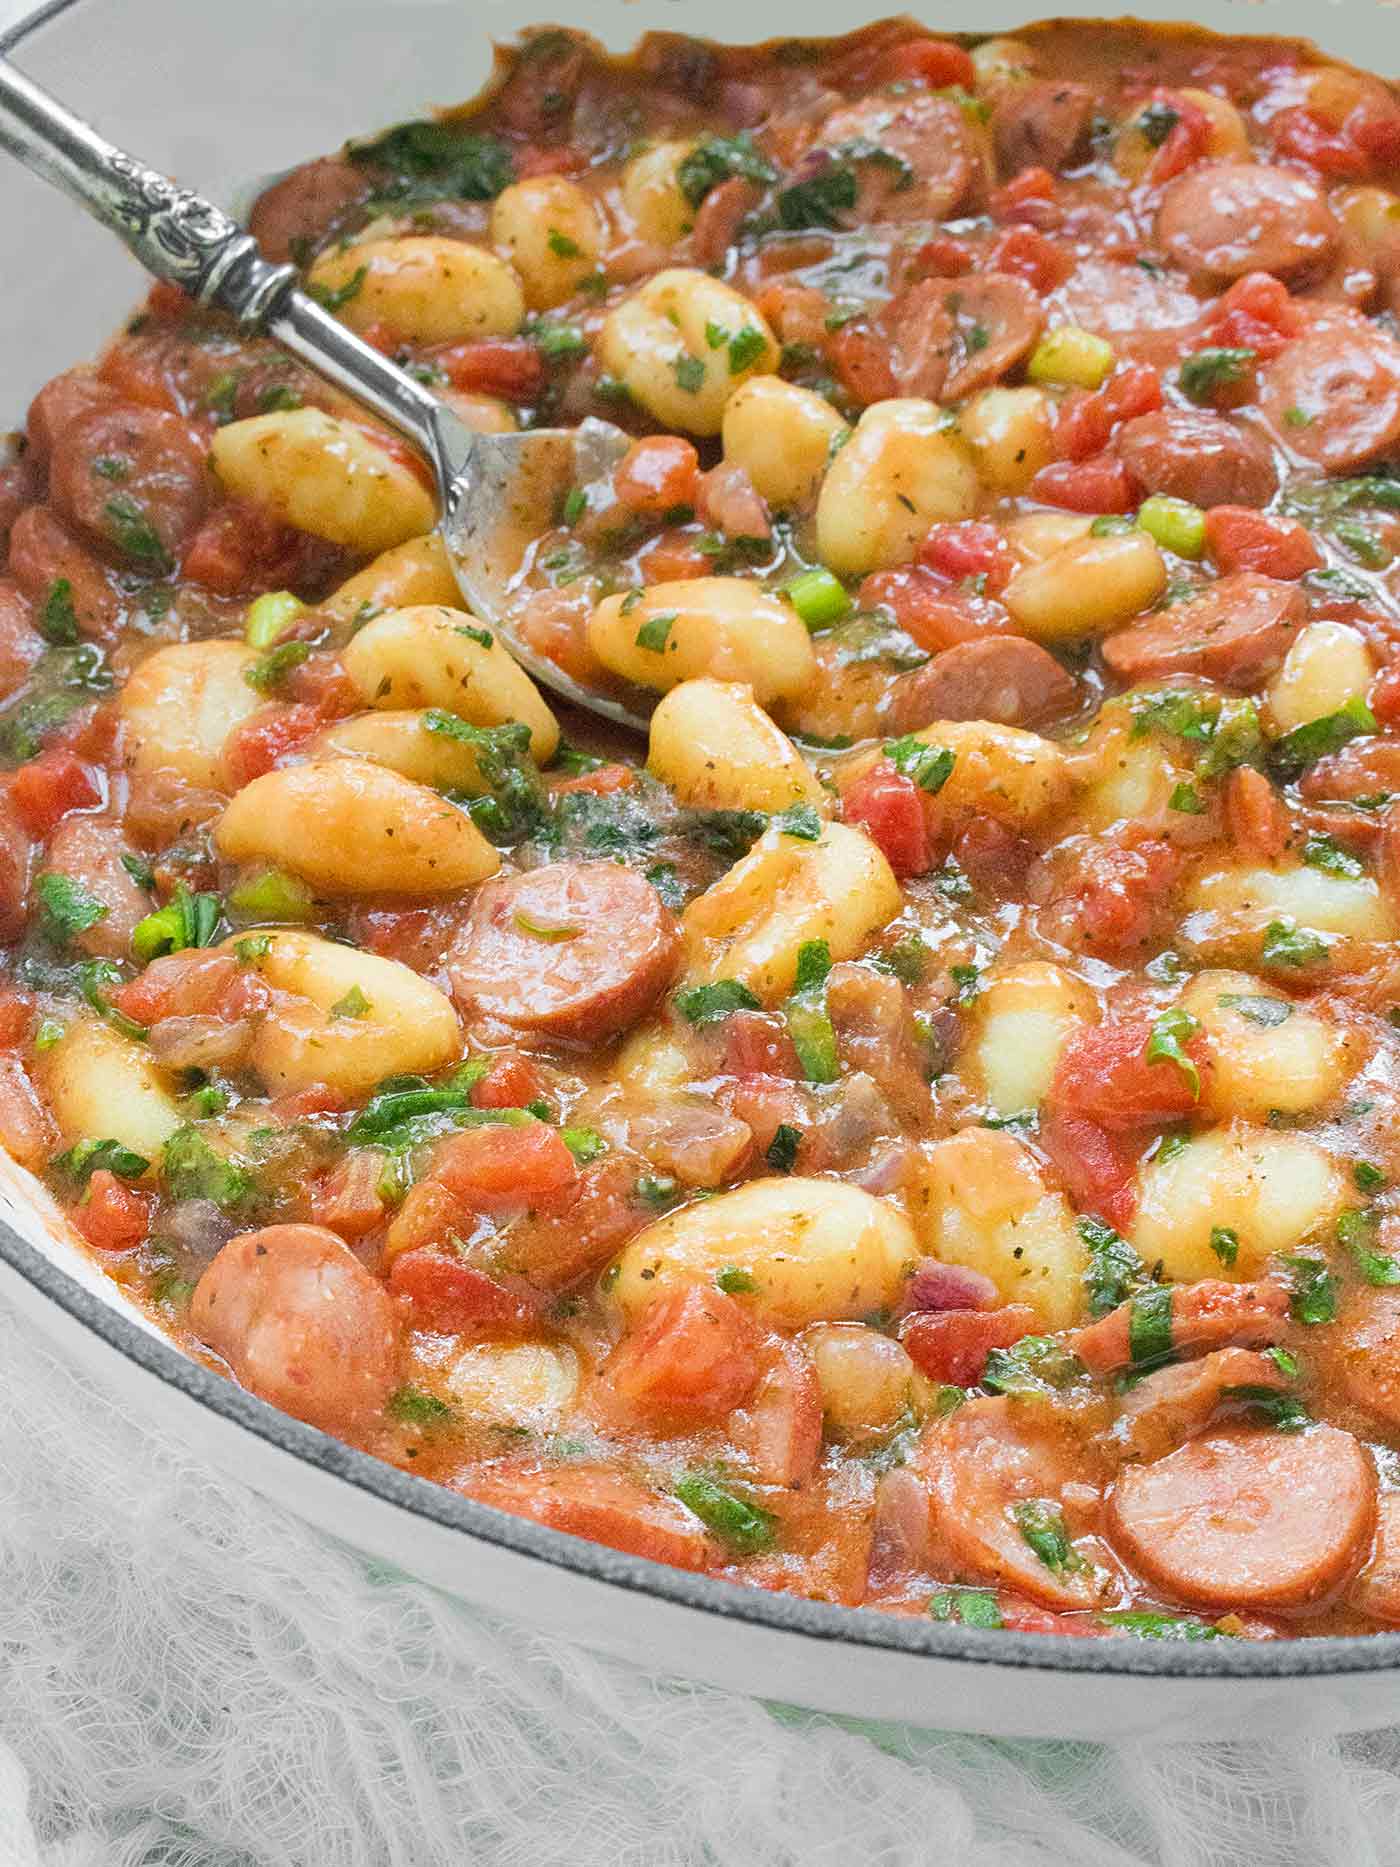 Close-up of Smoked Sausage & Gnocchi in a skillet